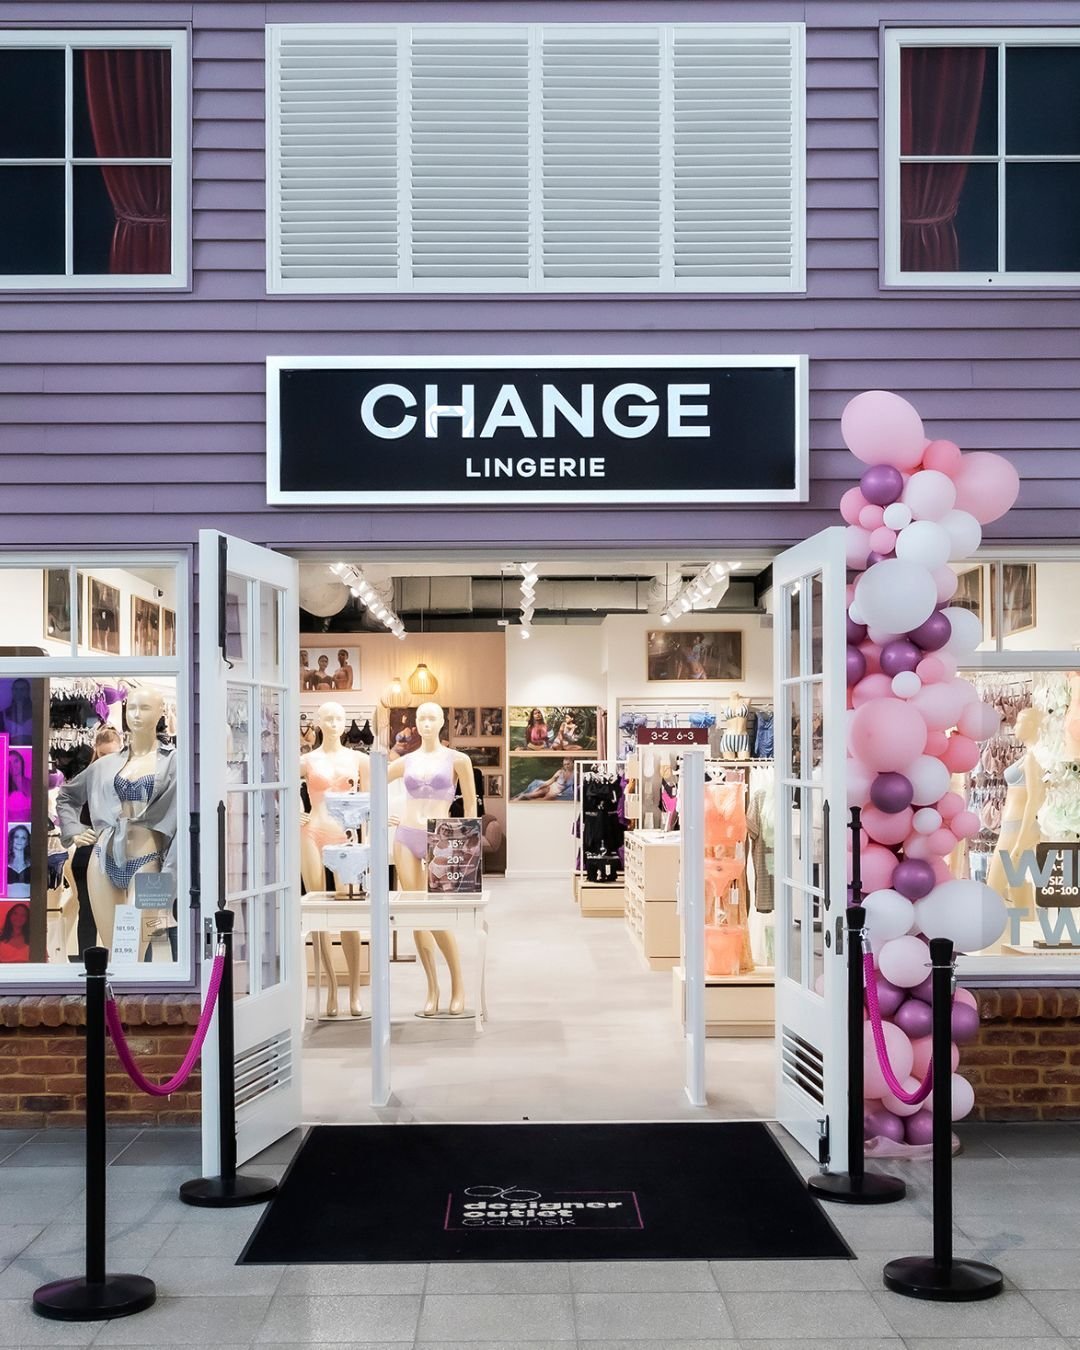 New Change Lingerie store at @designeroutletgdansk ⚡
The new store is 142 sqm and offers ladies sensual lingerie as well as fashionable swimsuits, comfortable nightwear, practical homewear and high-quality hosiery and accessories.

The Scandinavian b